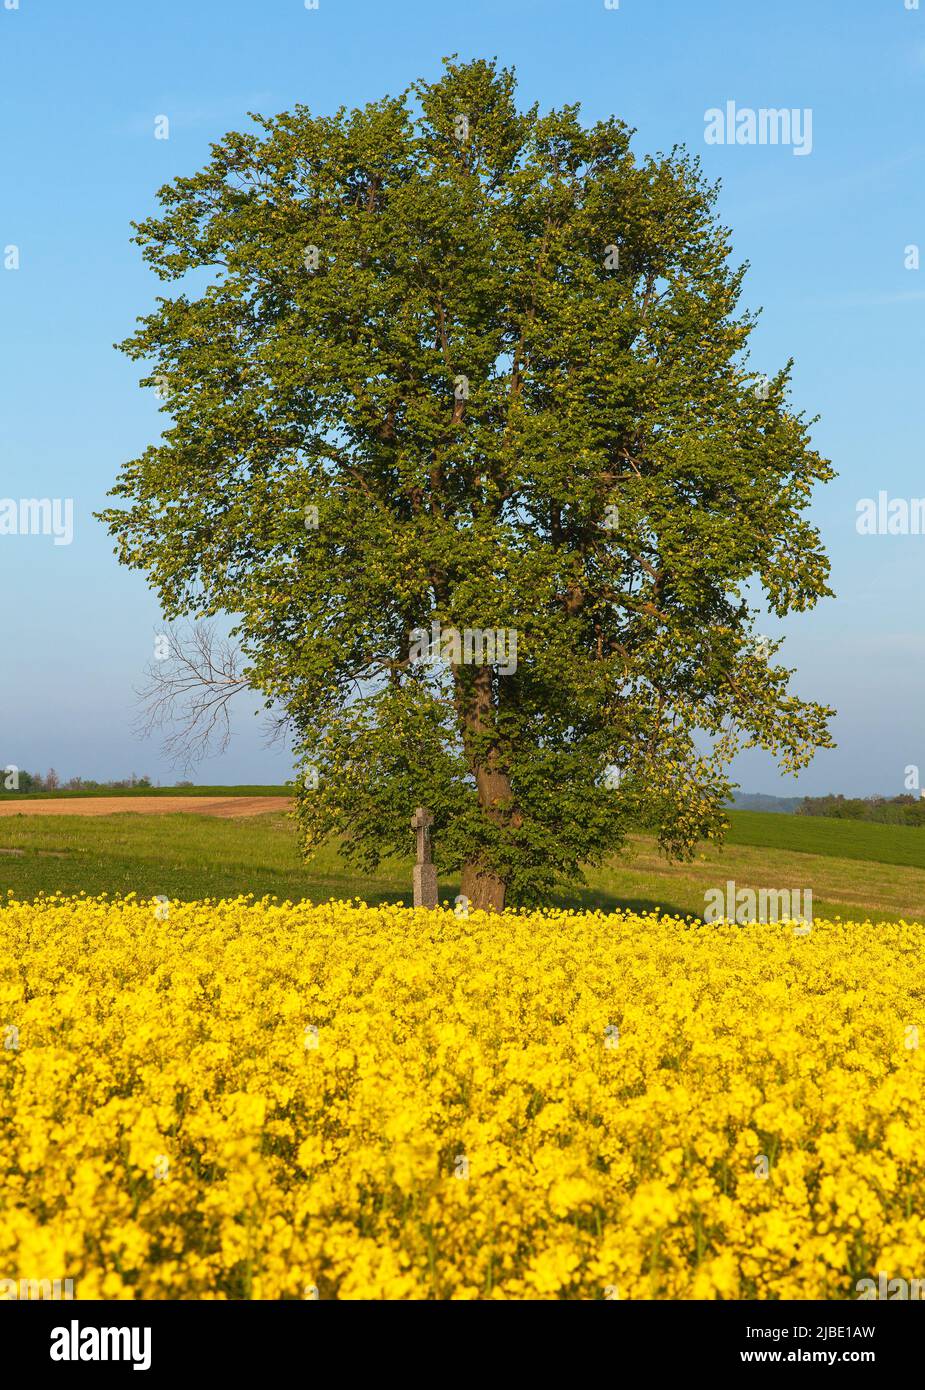 Field of rapeseed, canola or colza in Latin Brassica Napus with, lime tree and crucifix, springtime golden flowering field Stock Photo